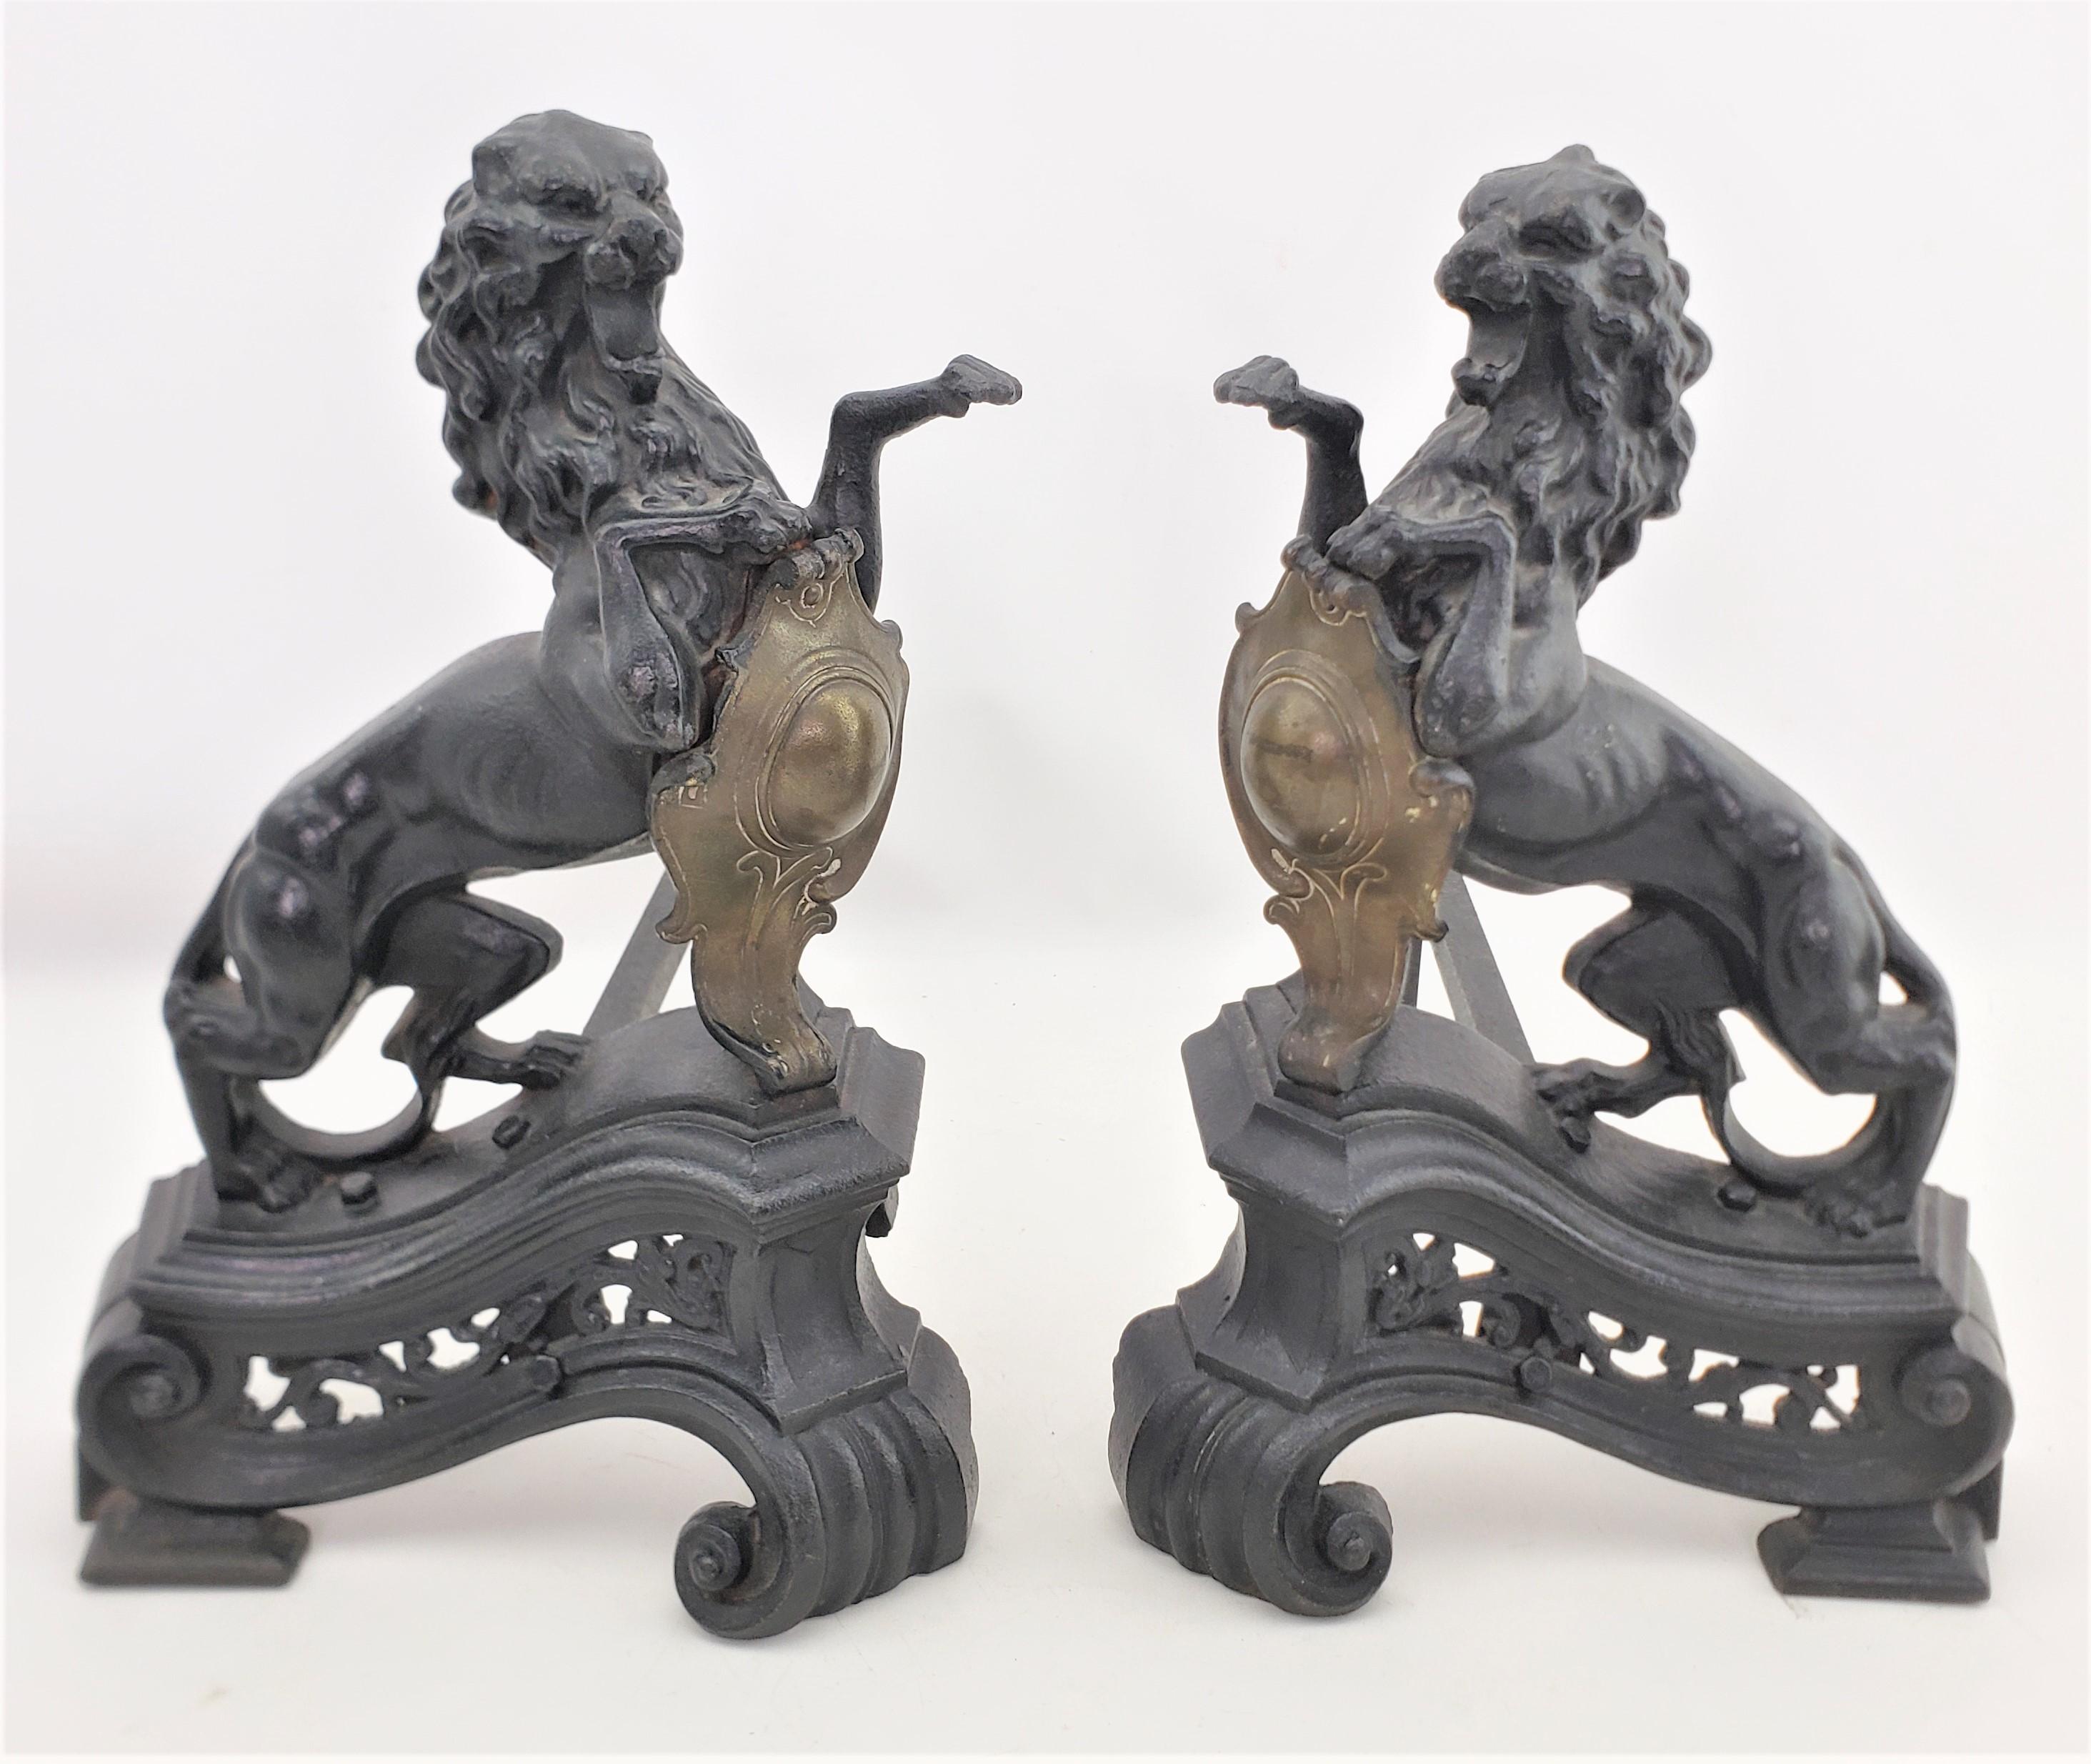 This pair of antique andirons are unsigned, but presumed to have originated from England and date to approximately 1880 and done in the period Victorian style. The andirons are done in ornately cast iron and depict rearing and roaring figural lions